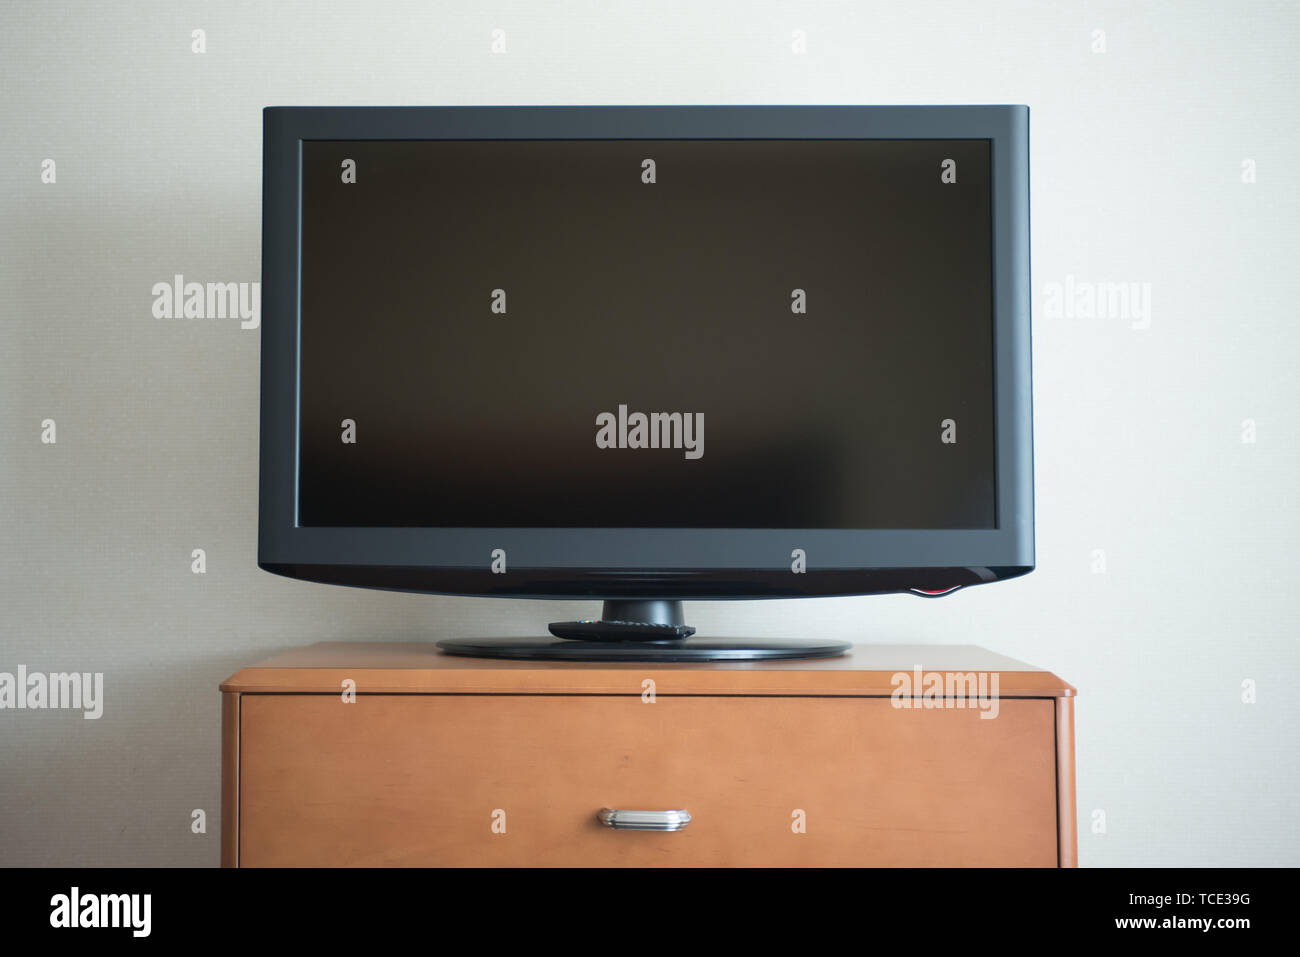 Flat Screen Tv Set On Top Of A Wood Dresser With Draw Stock Photo